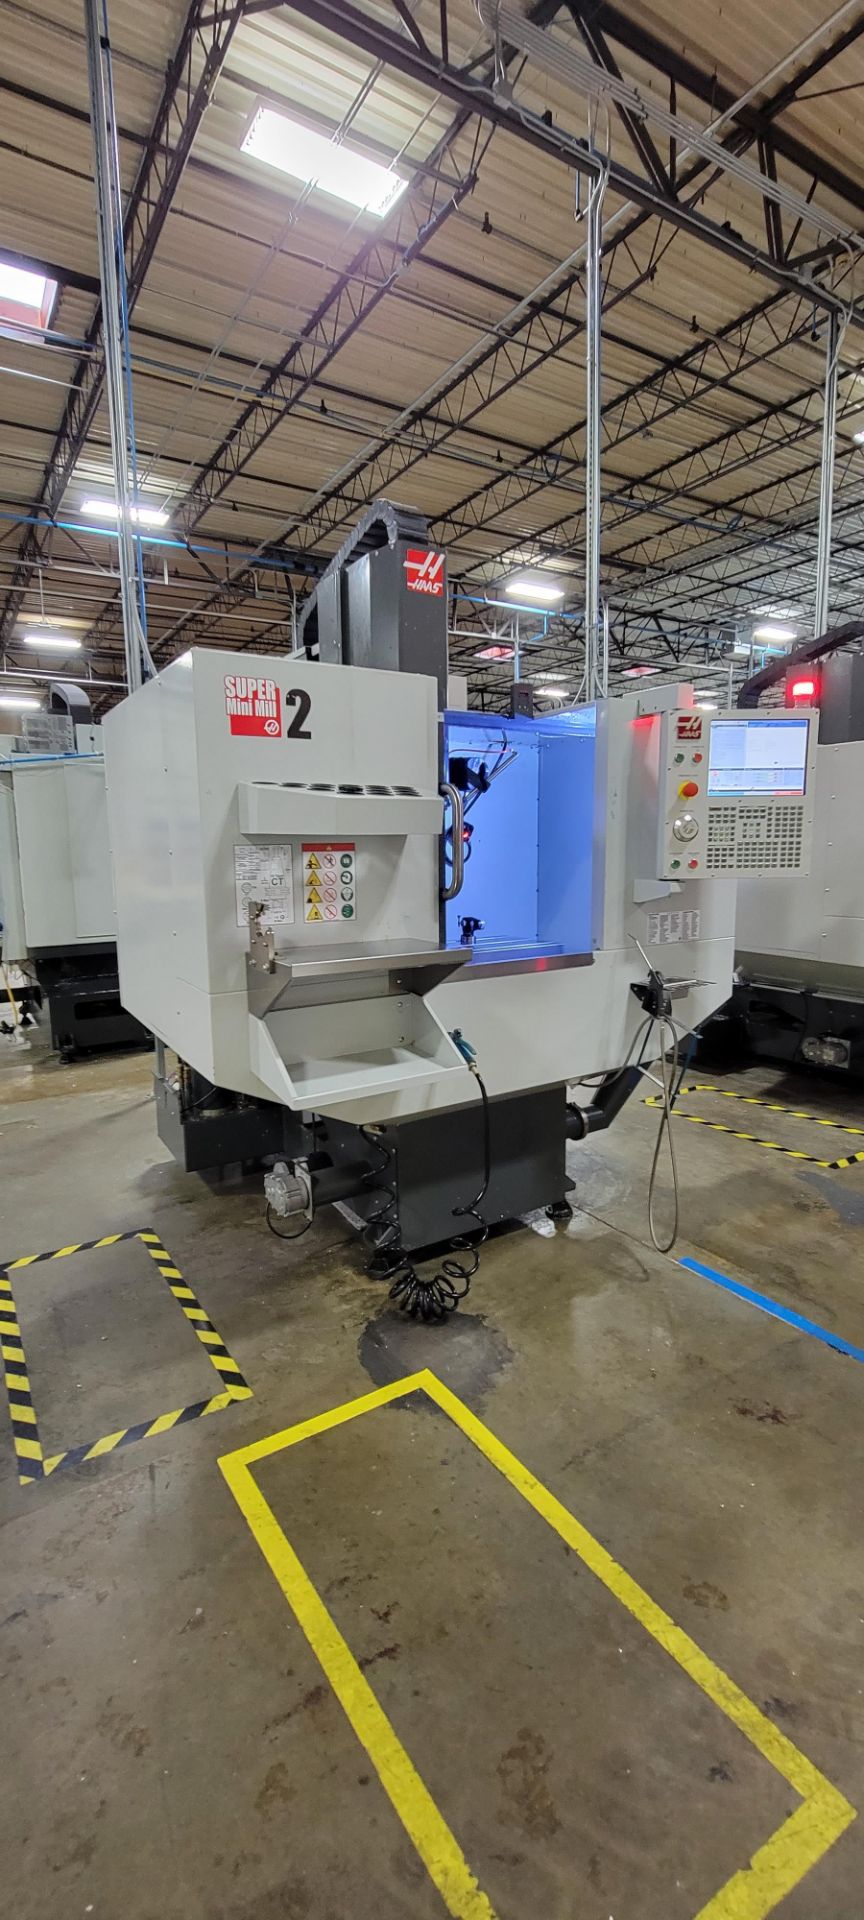 Haas Super Mini Mill 2 3-Axis CNC Vertical Machining Center - Image 3 of 14